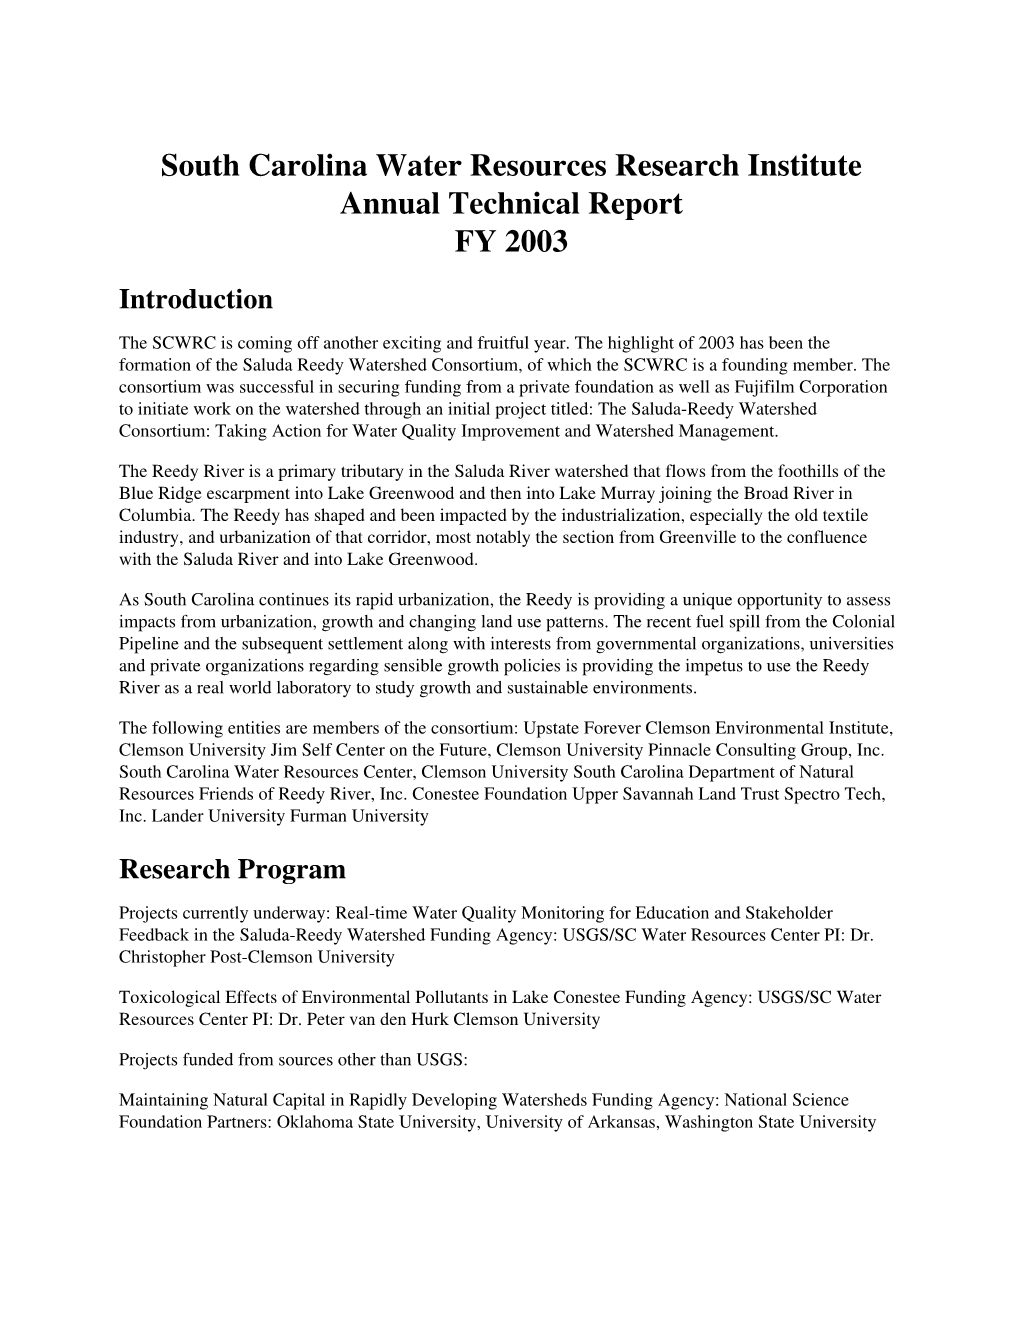 South Carolina Water Resources Research Institute Annual Technical Report FY 2003 Introduction the SCWRC Is Coming Off Another Exciting and Fruitful Year